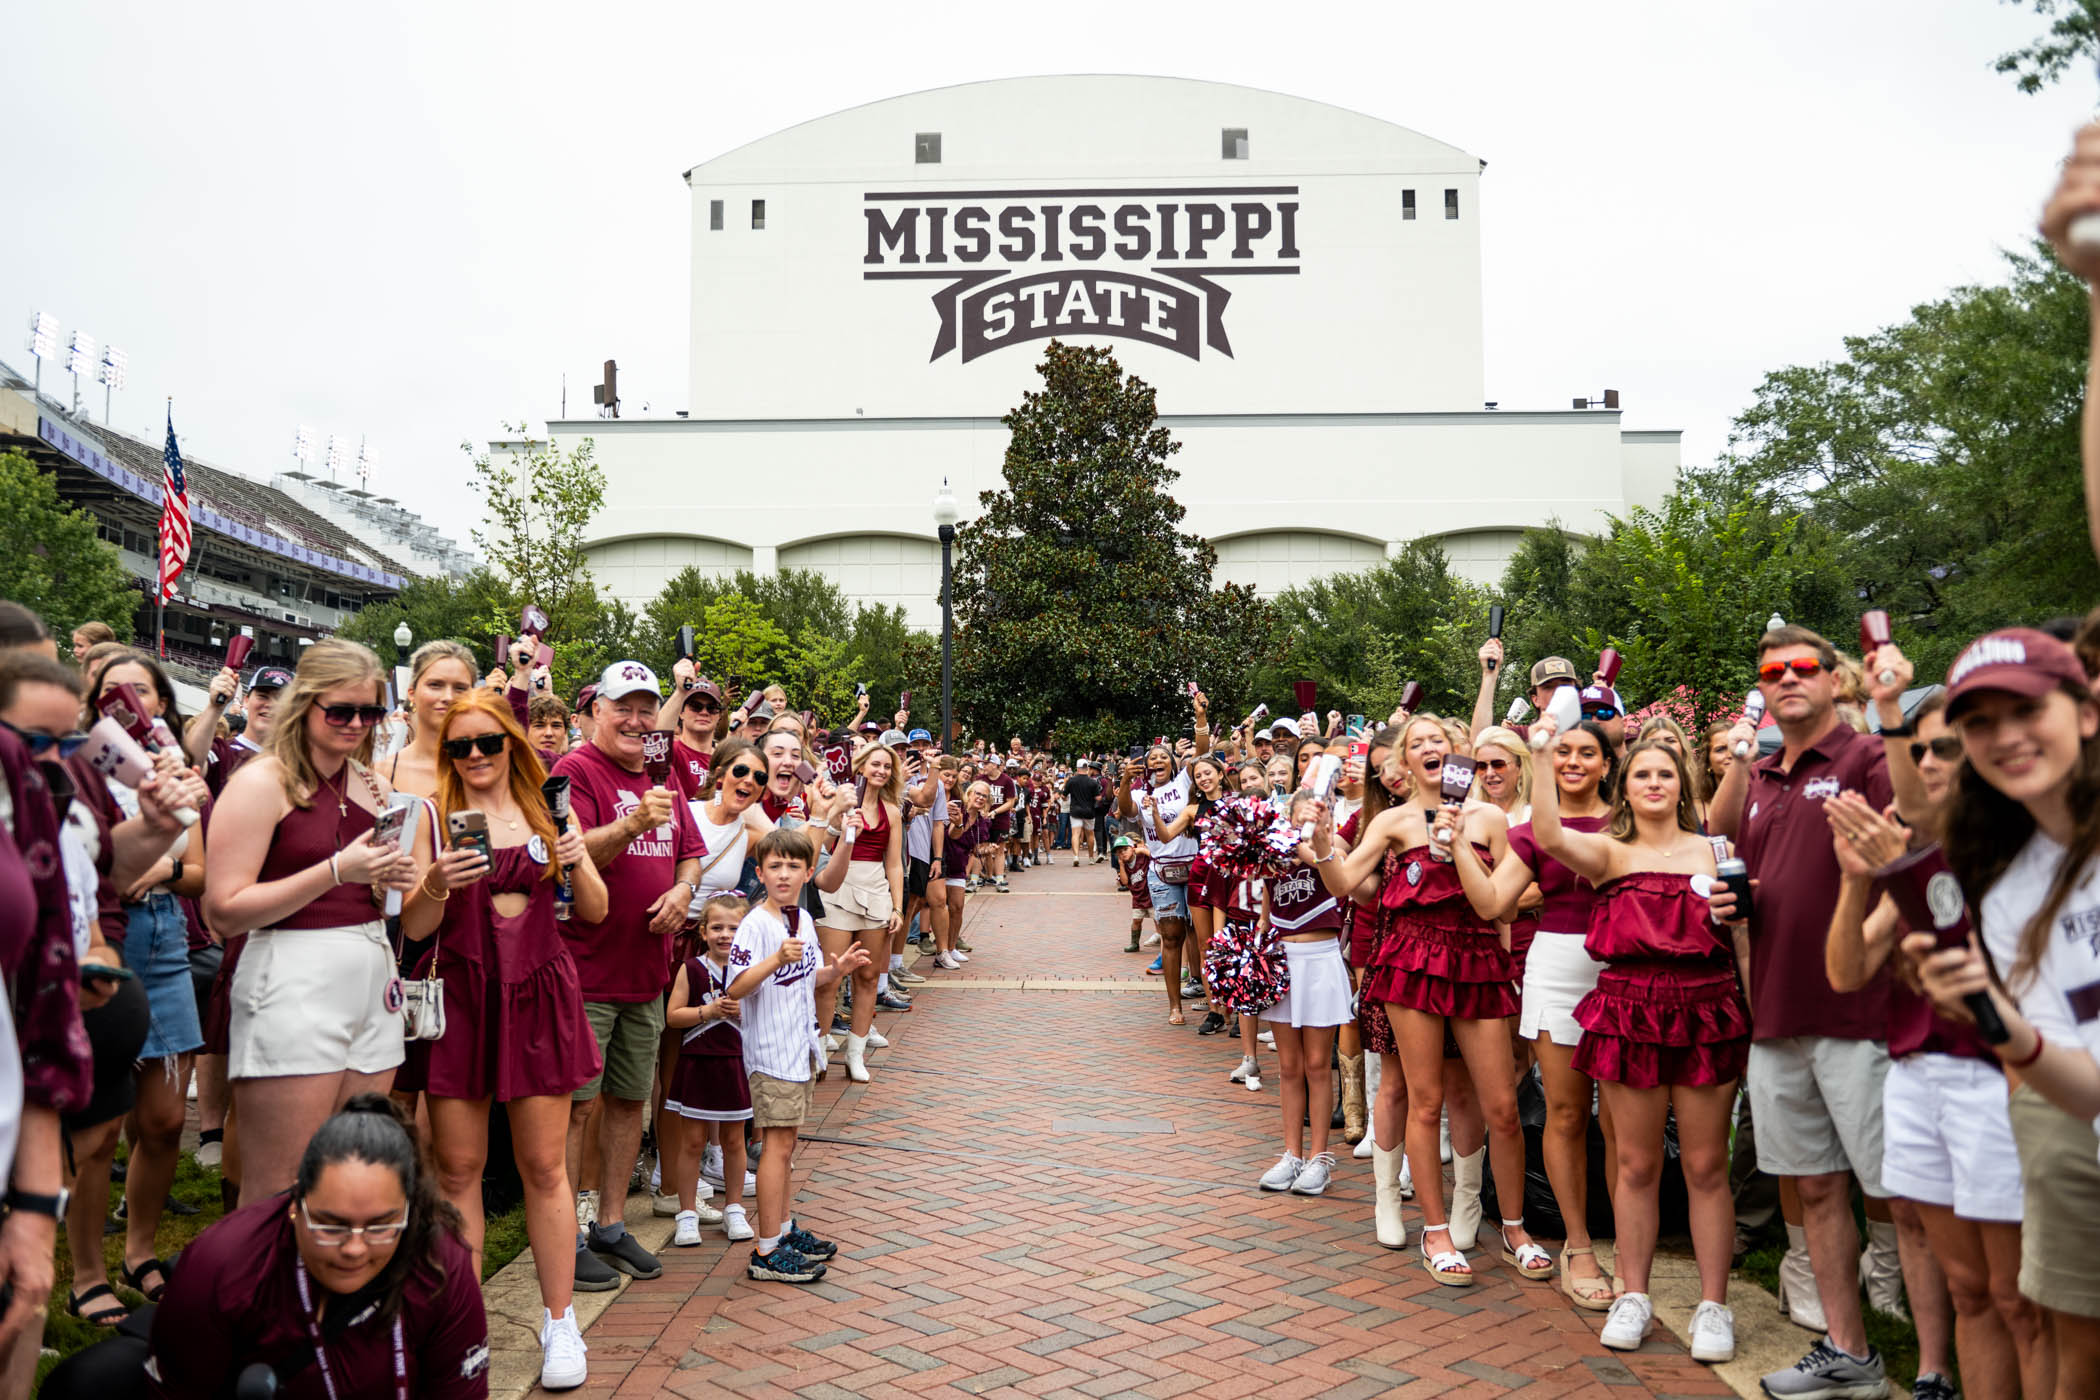 Fans gather together in the Junction for football festivities before packing out Davis Wade Stadium at the first Saturday in Starkvegas of the year. 